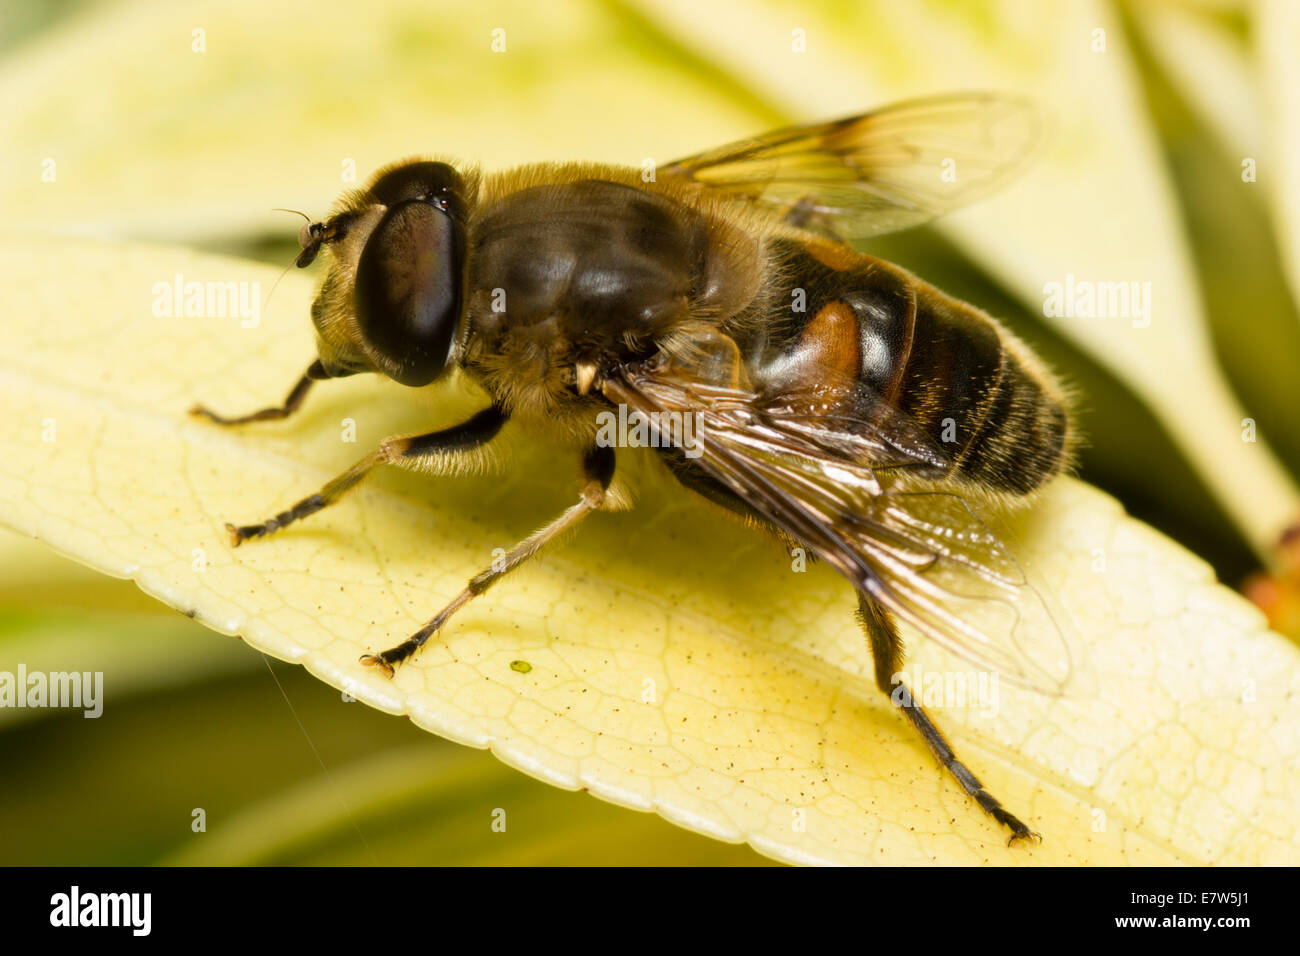 Male UK hoverfly, Eristalis pertinax, a common garden visitor Stock Photo